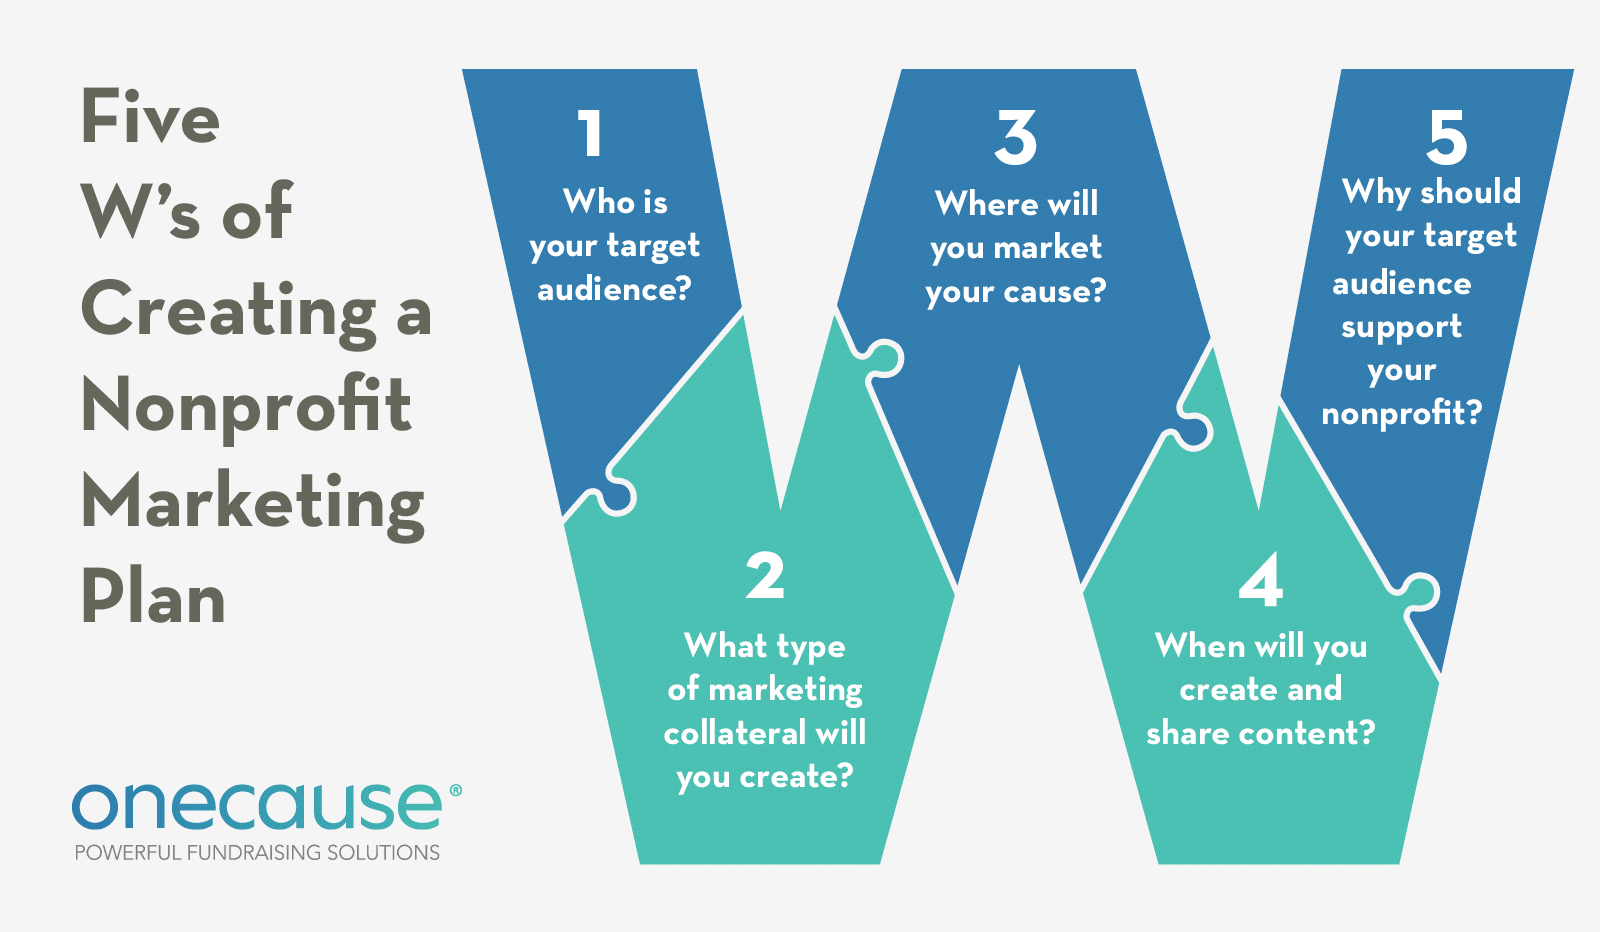 Consider the 5 W’s of creating a nonprofit marketing plan to guide your marketing strategy. 